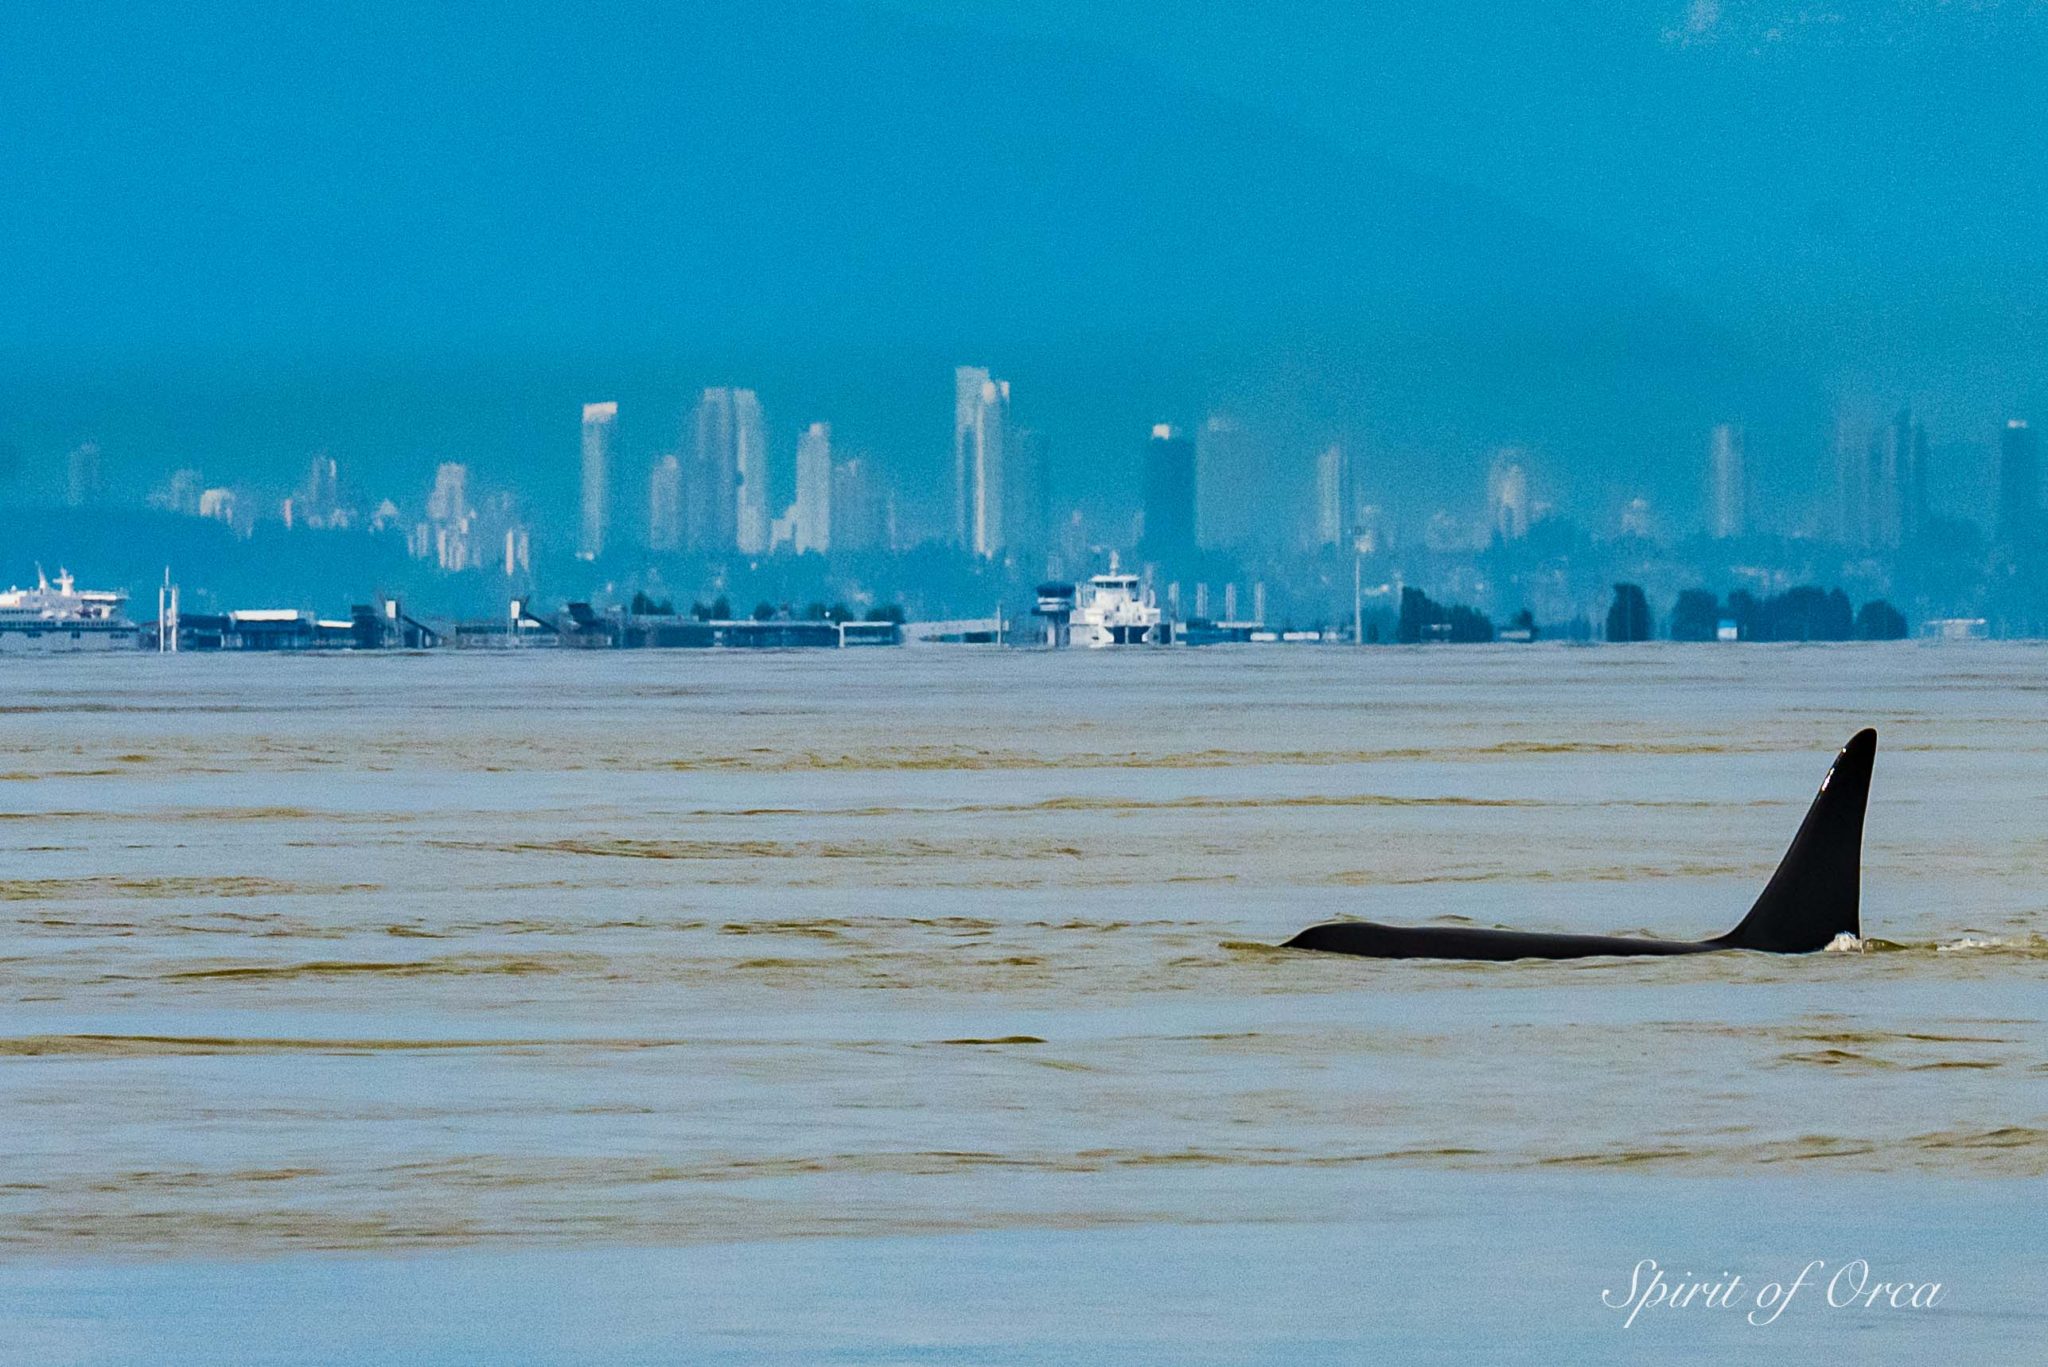 Orca with Vancouver in background